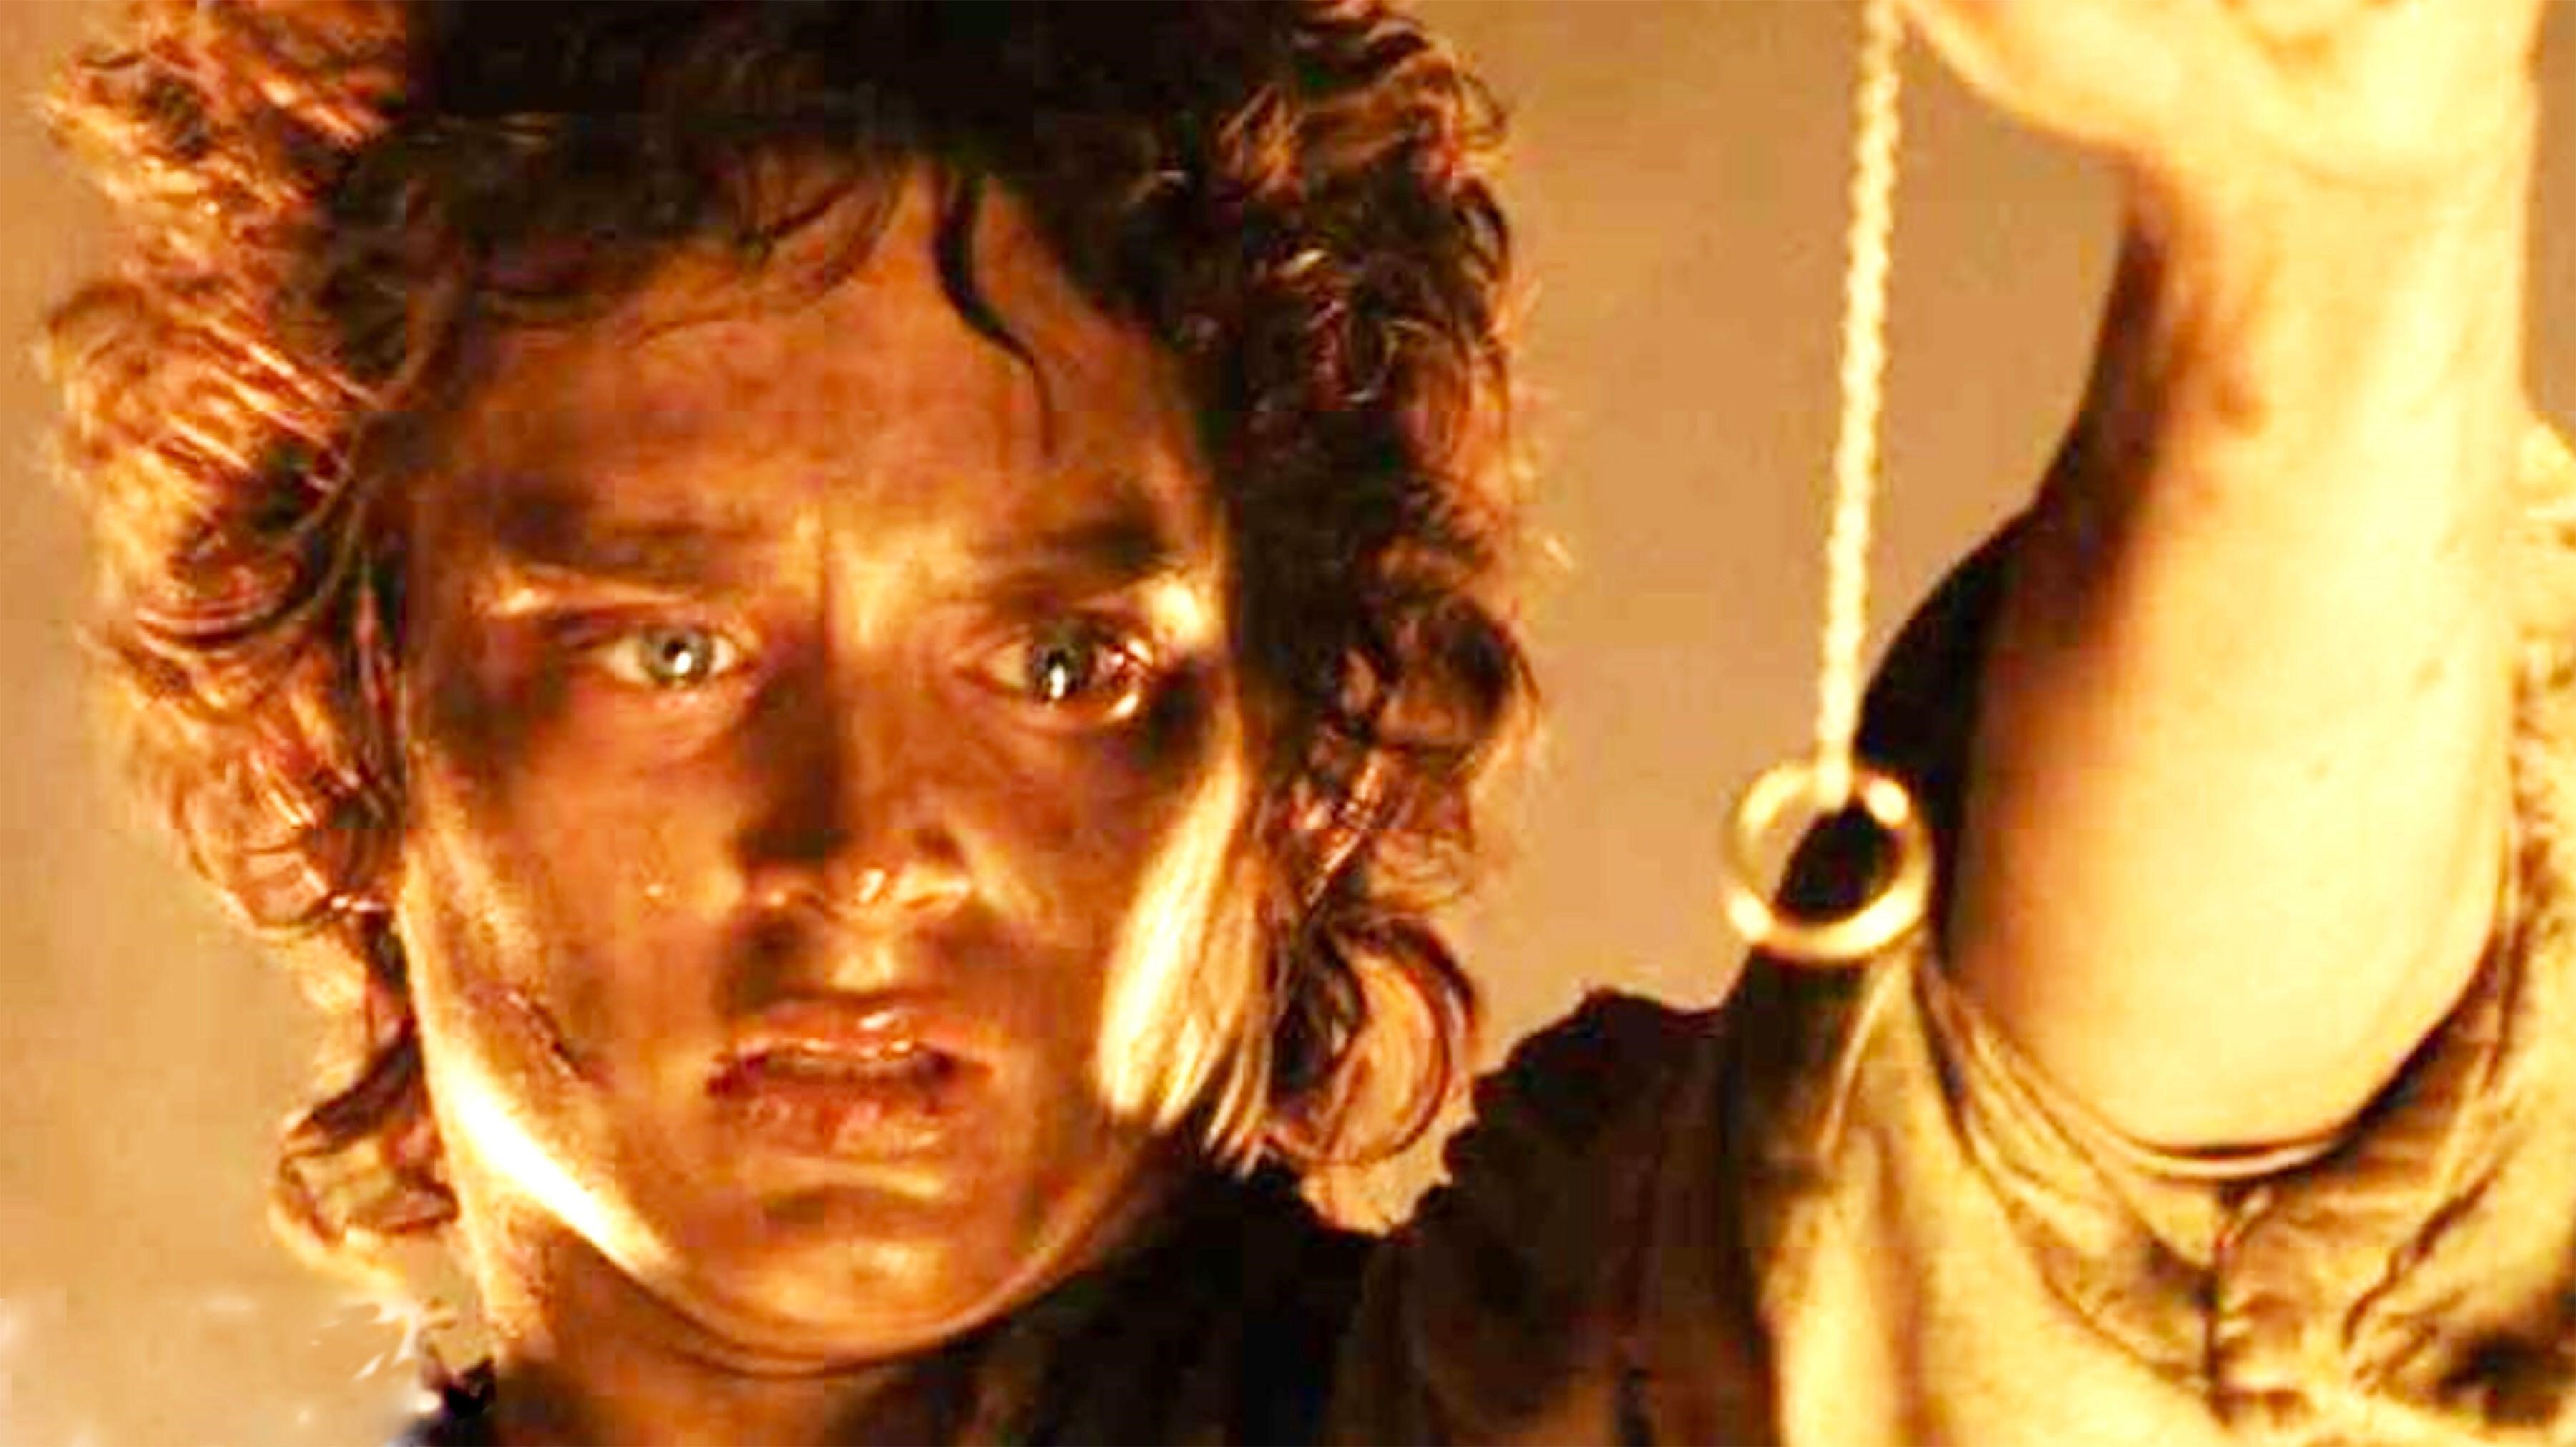 The Lord of the Rings: The Return of the King Extended Edition Theater Dates